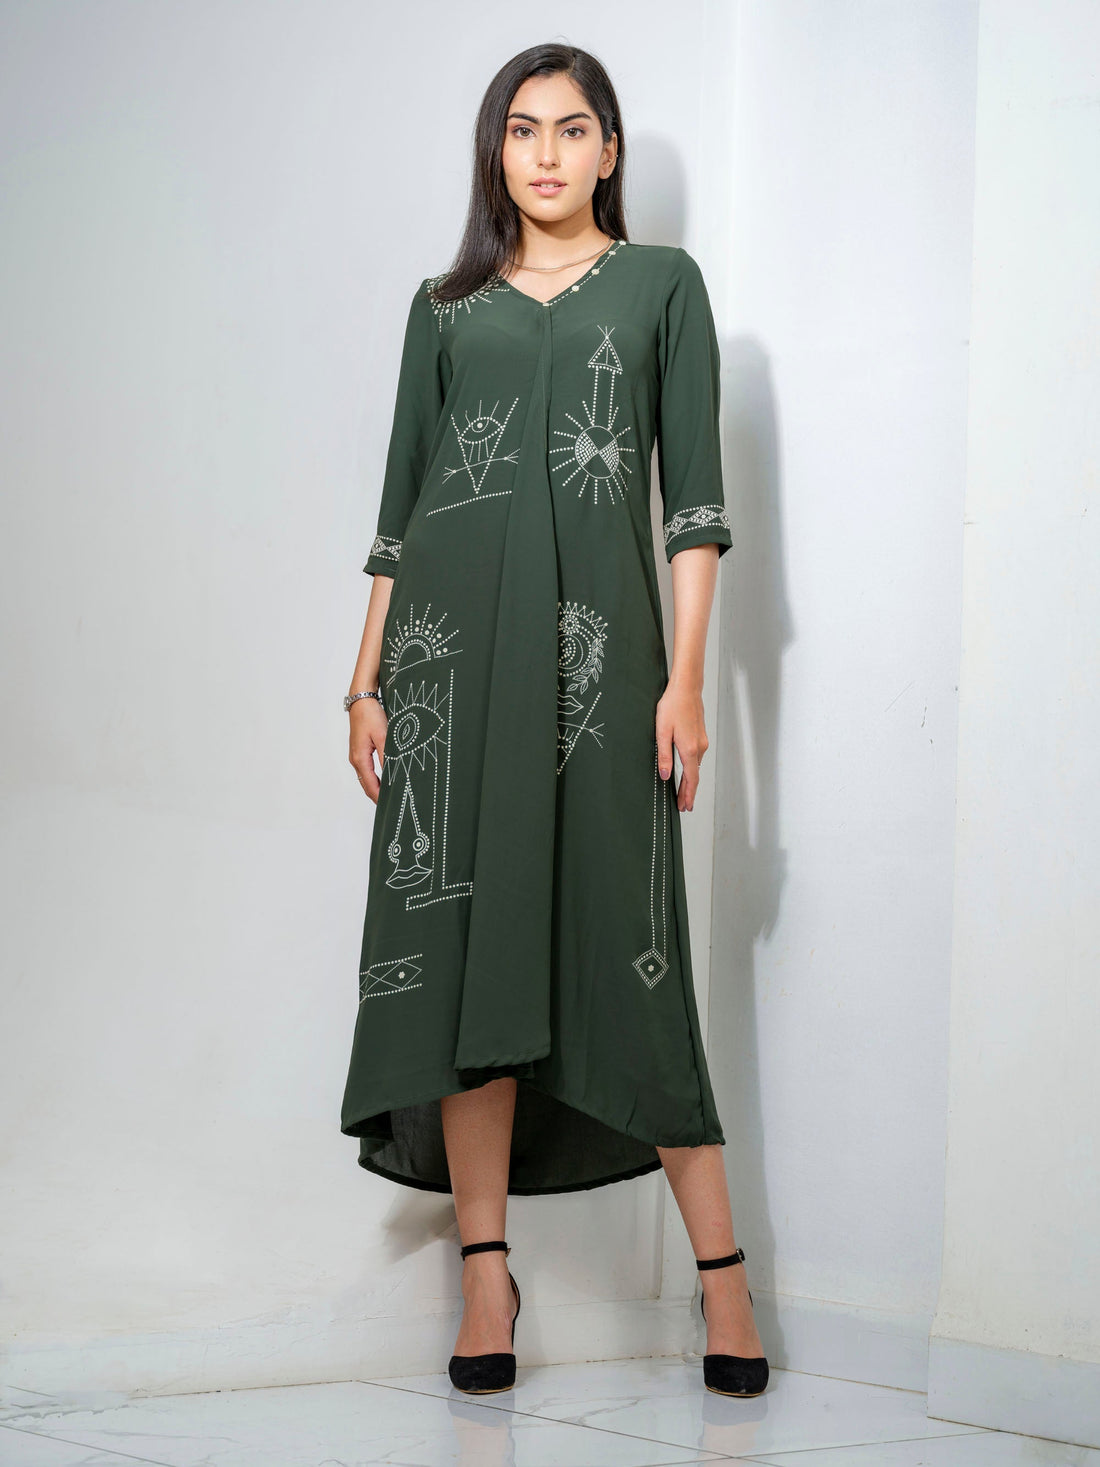 Solid colored dress with yoke embellishment with Dori embroidery Etiquette Apparel